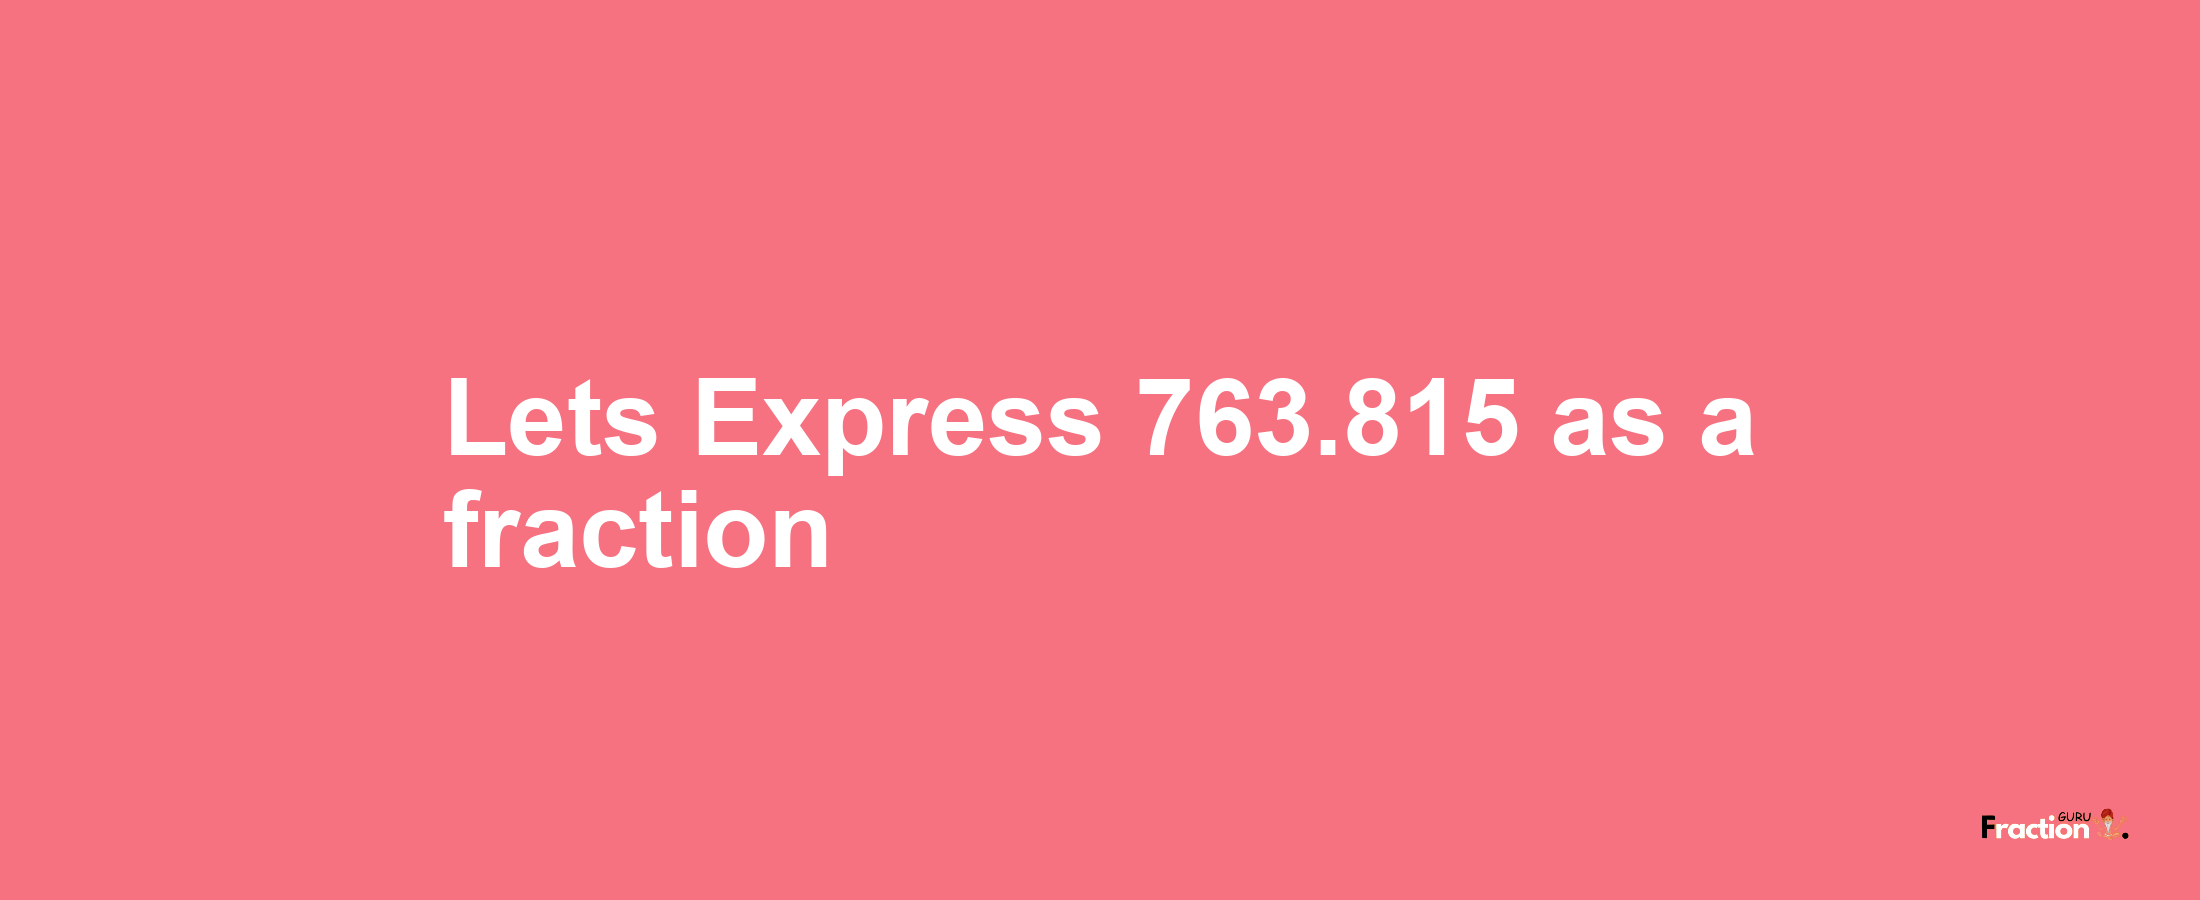 Lets Express 763.815 as afraction